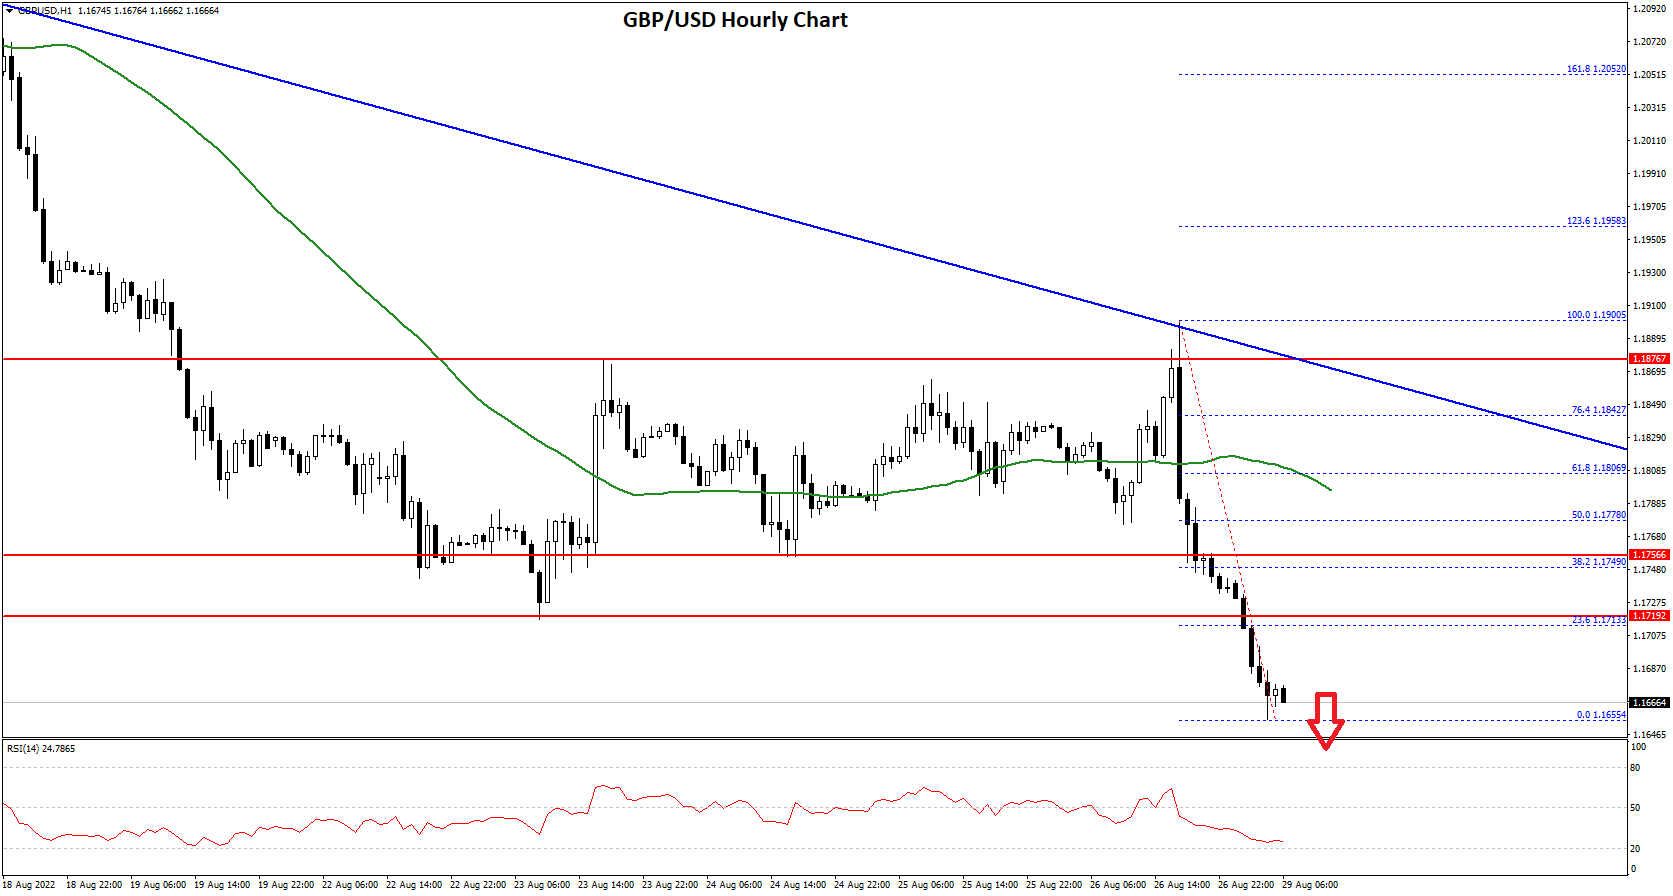 GBP/USD Nosedives While USD/CAD Gains Strength